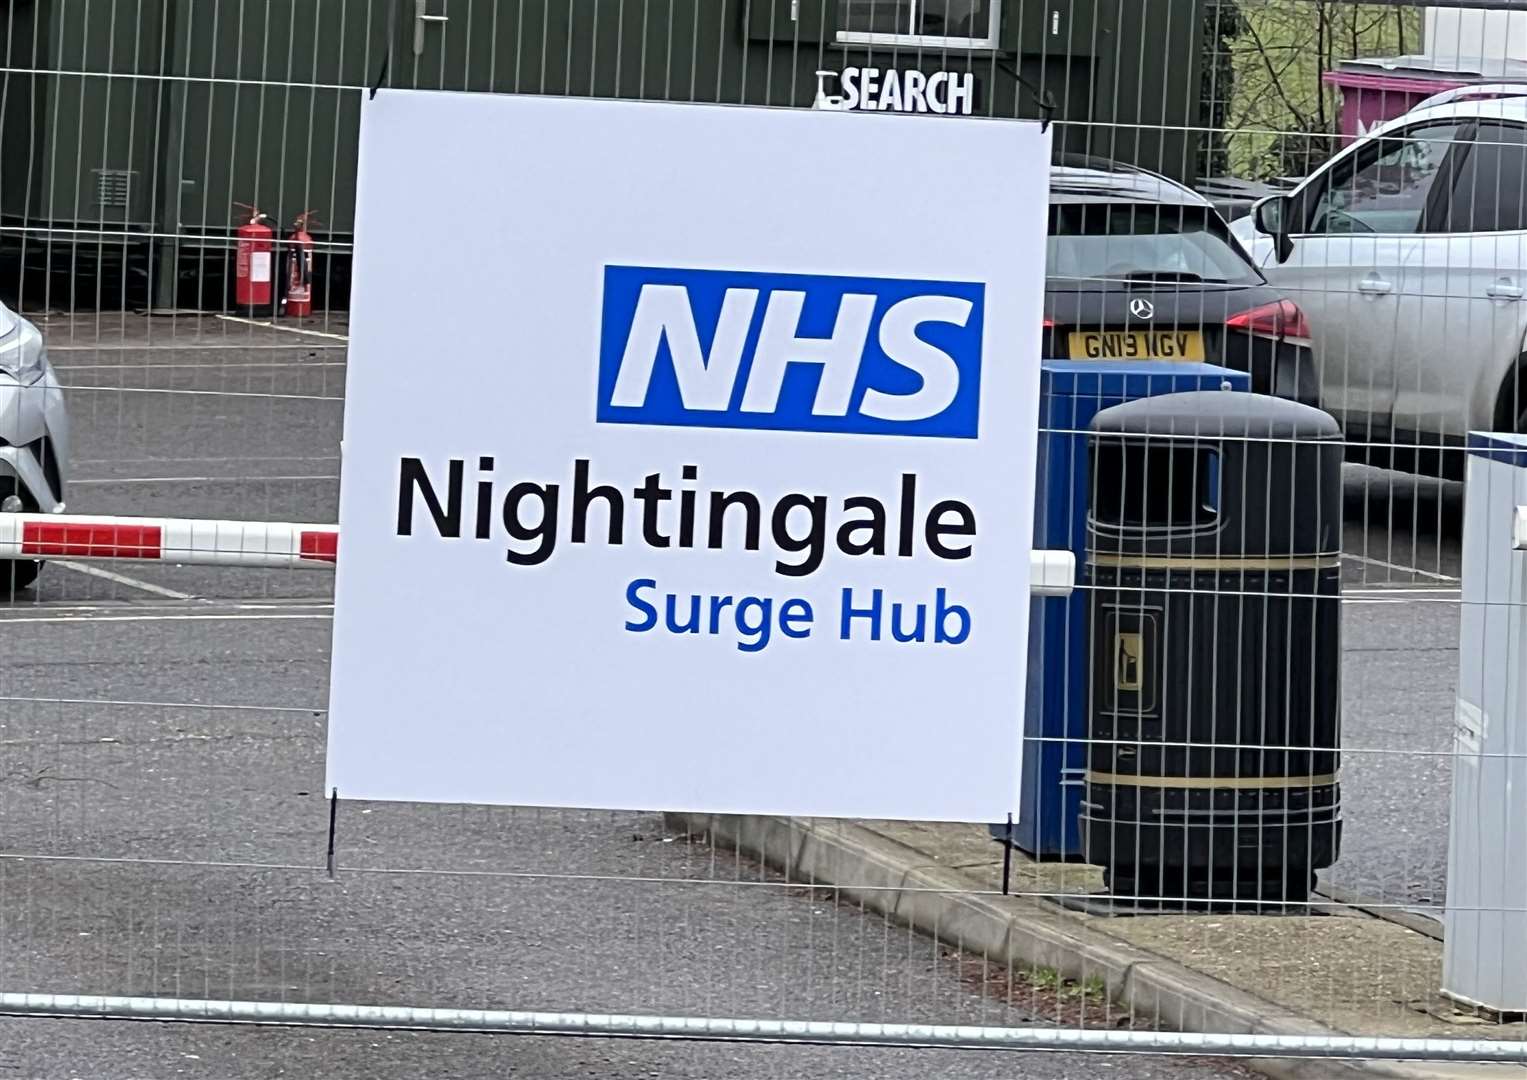 The surge hub will be able to cater for up to 100 people